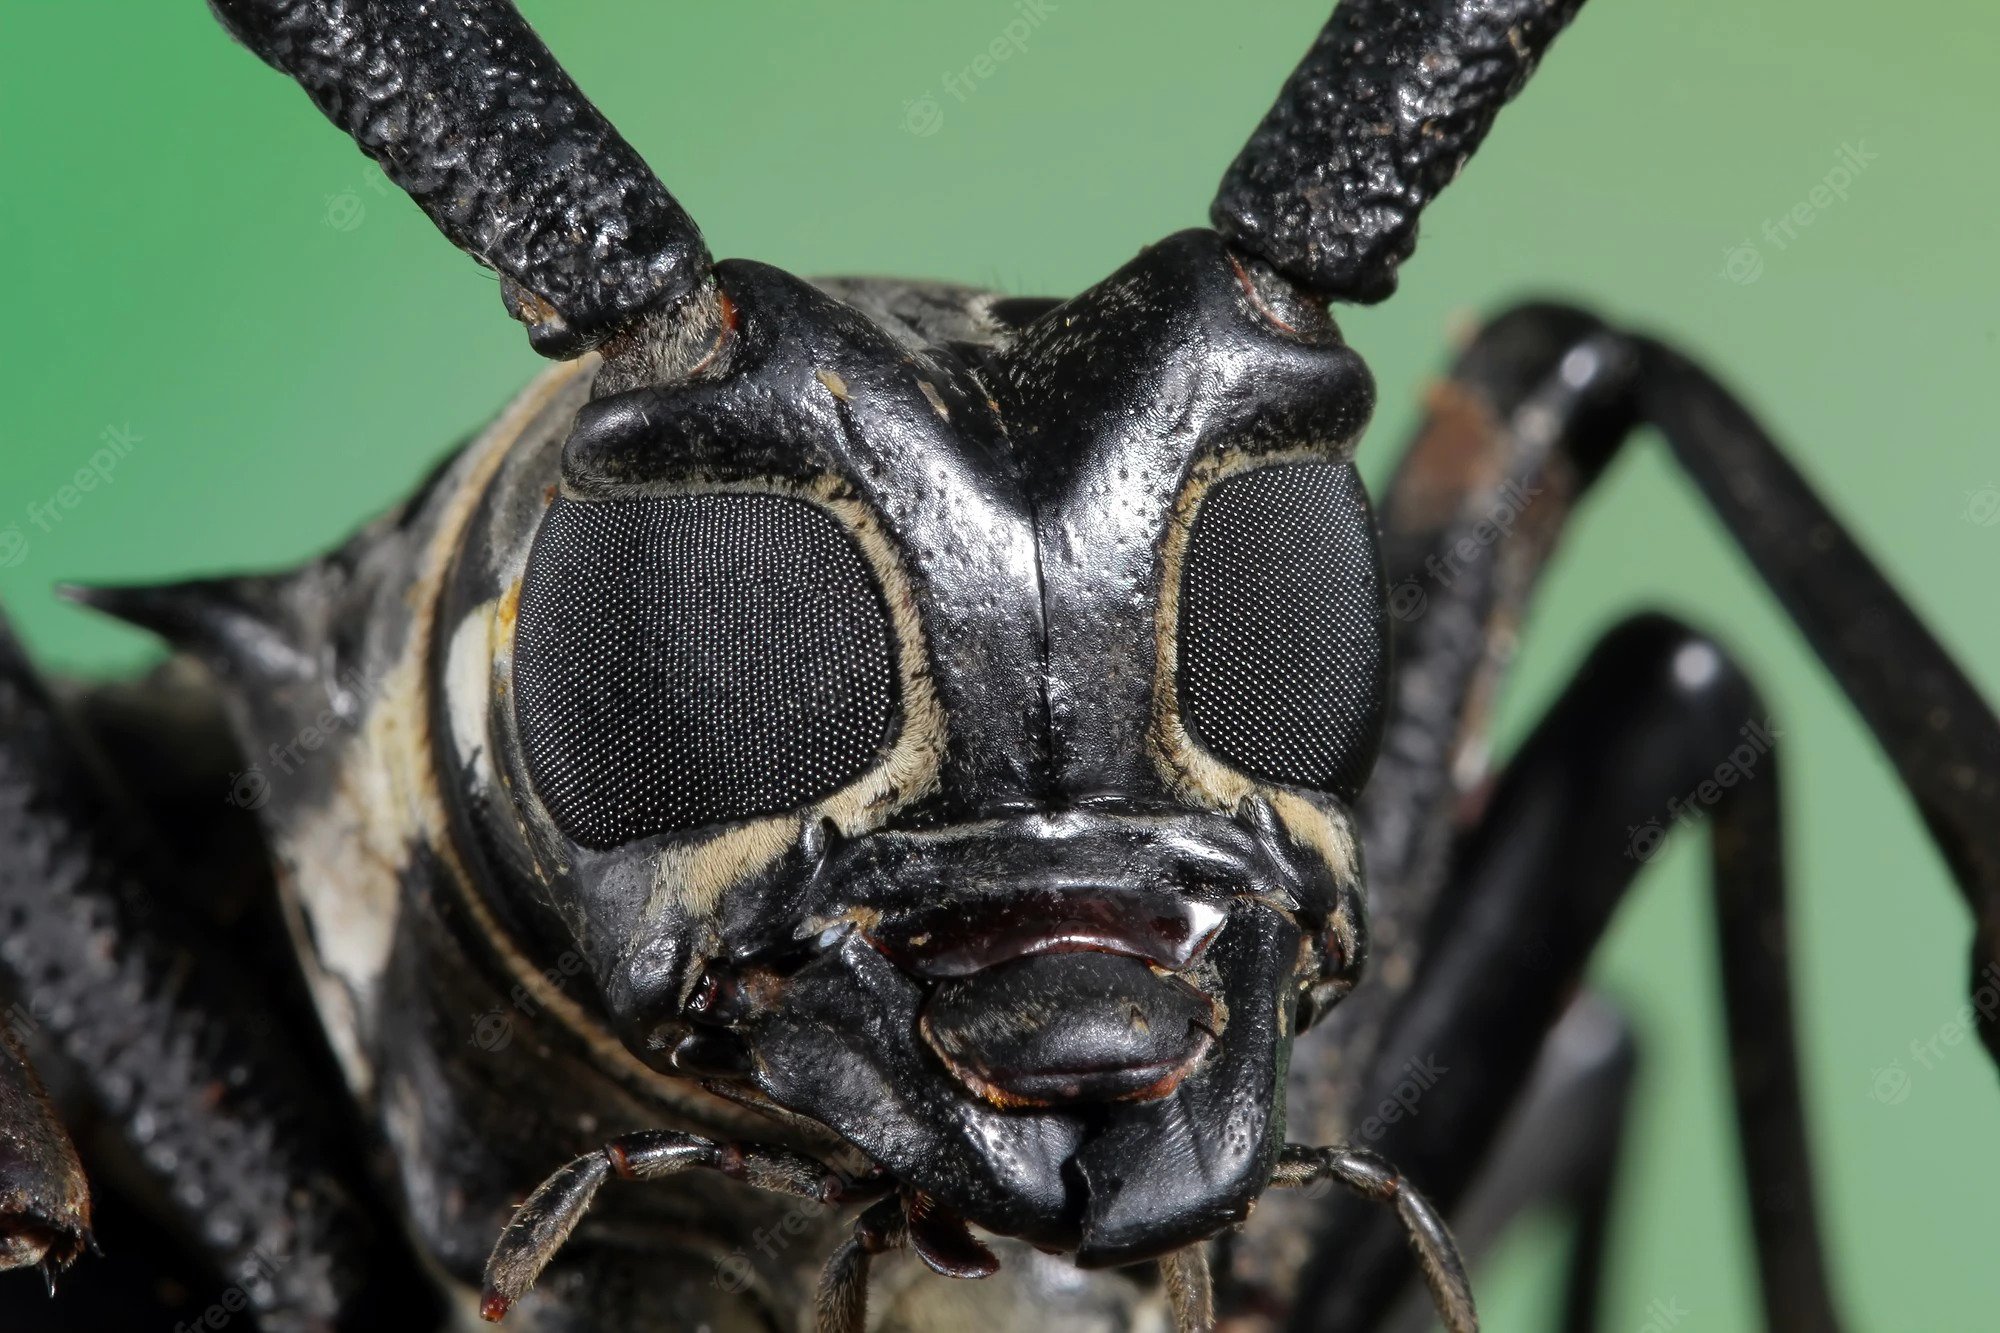 Long Horn Beetle - Close Up Of The Beetle That Looks Like A DC Supervillain